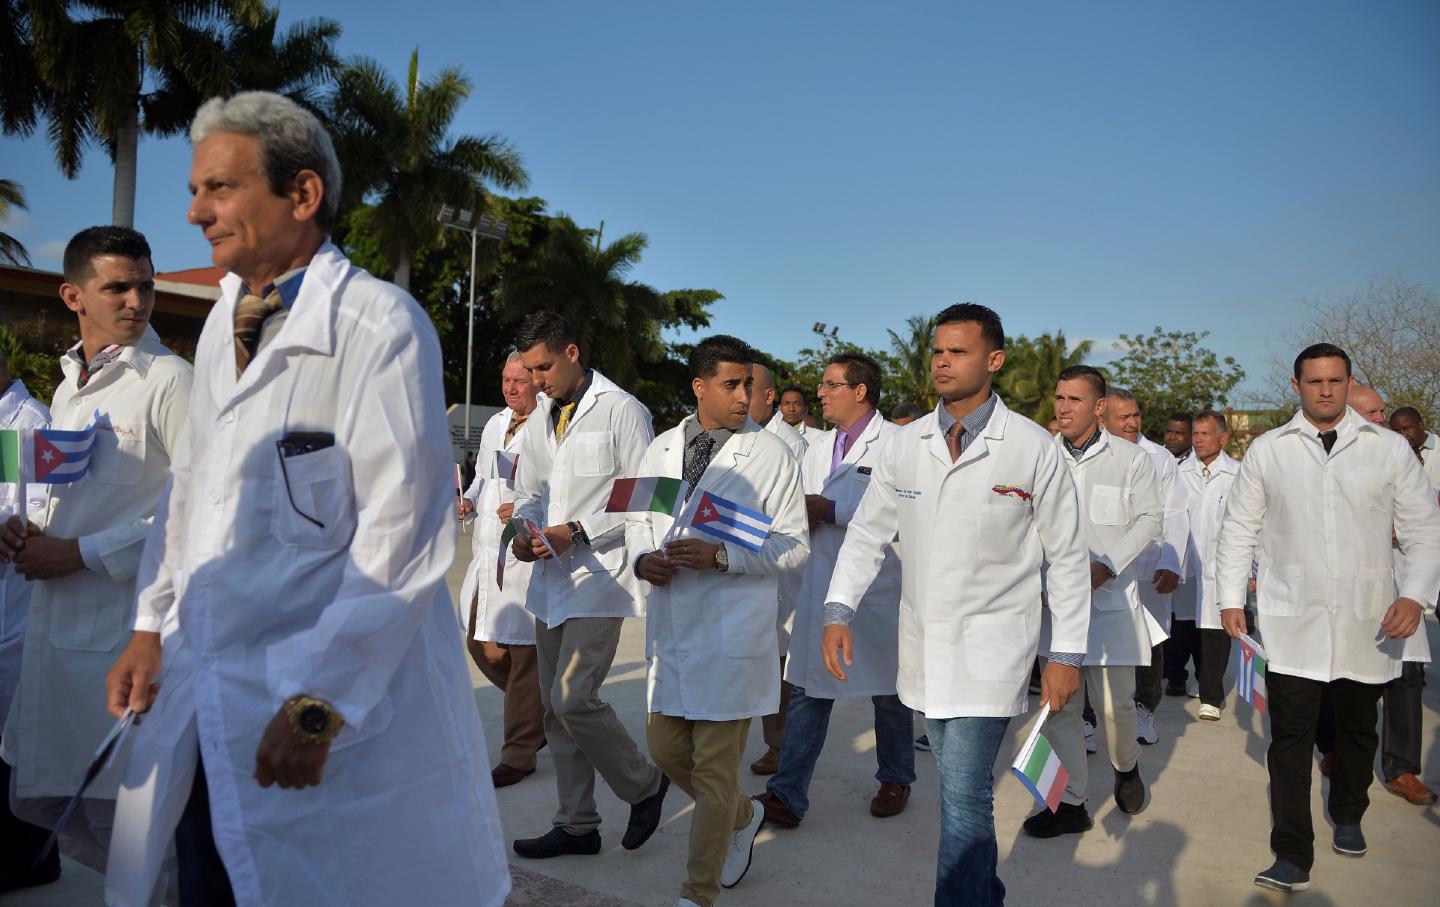 A group of doctors and nurses walk outside, holding small Cuban and Italian flags.